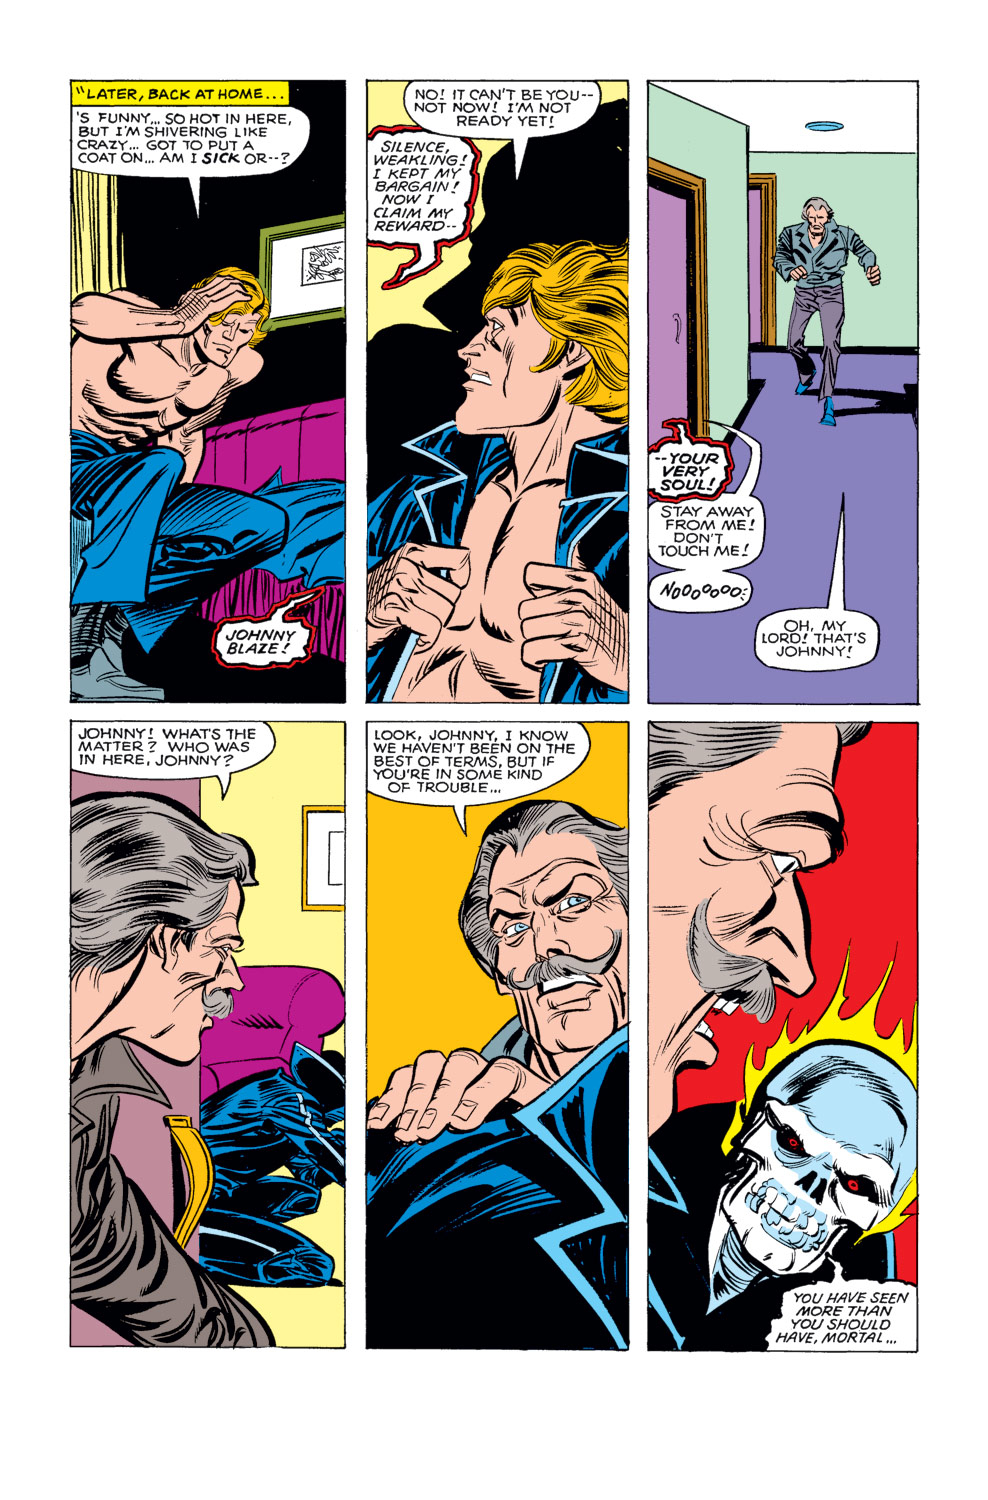 What If? (1977) issue 17 - Ghost Rider, Spider-Woman and Captain Marvel were villains - Page 7